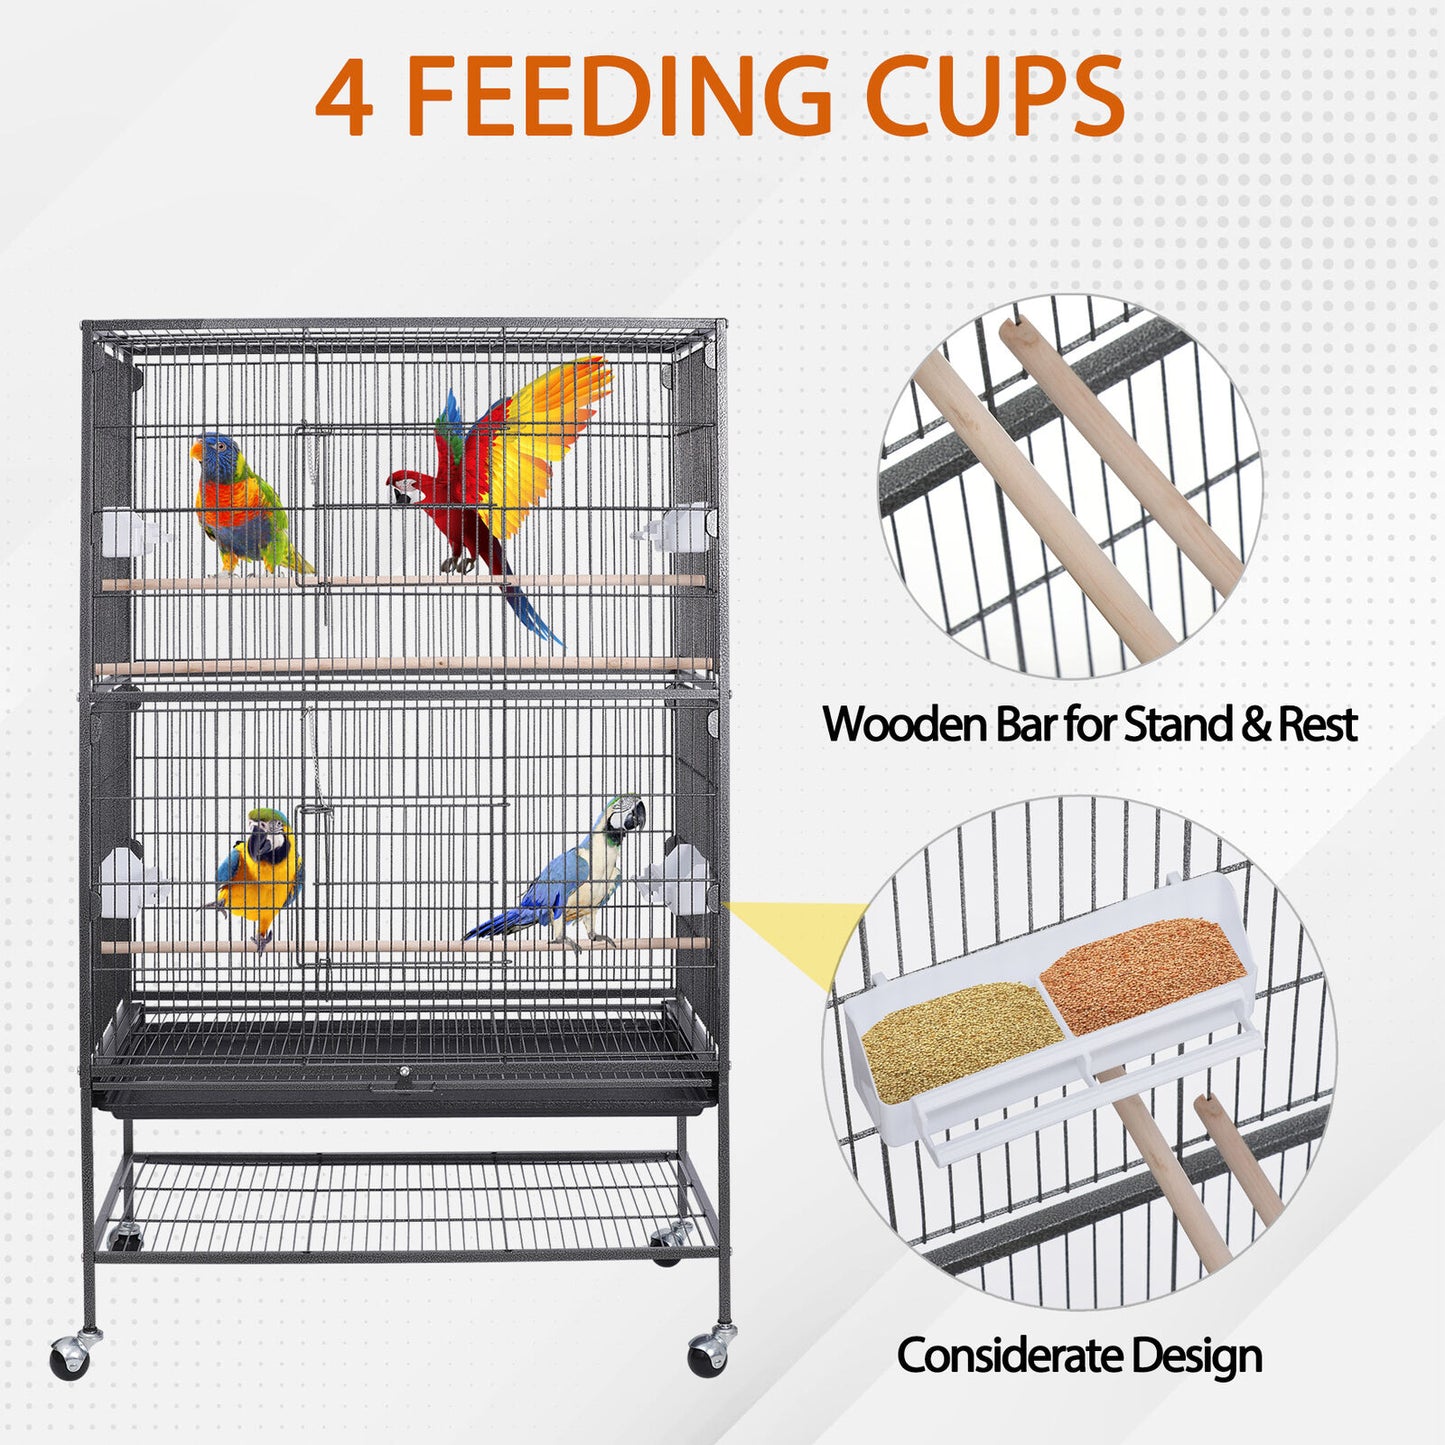 52" Wrought Iron Standing Large Flight King Parrot Bird Cage for Cockatiels